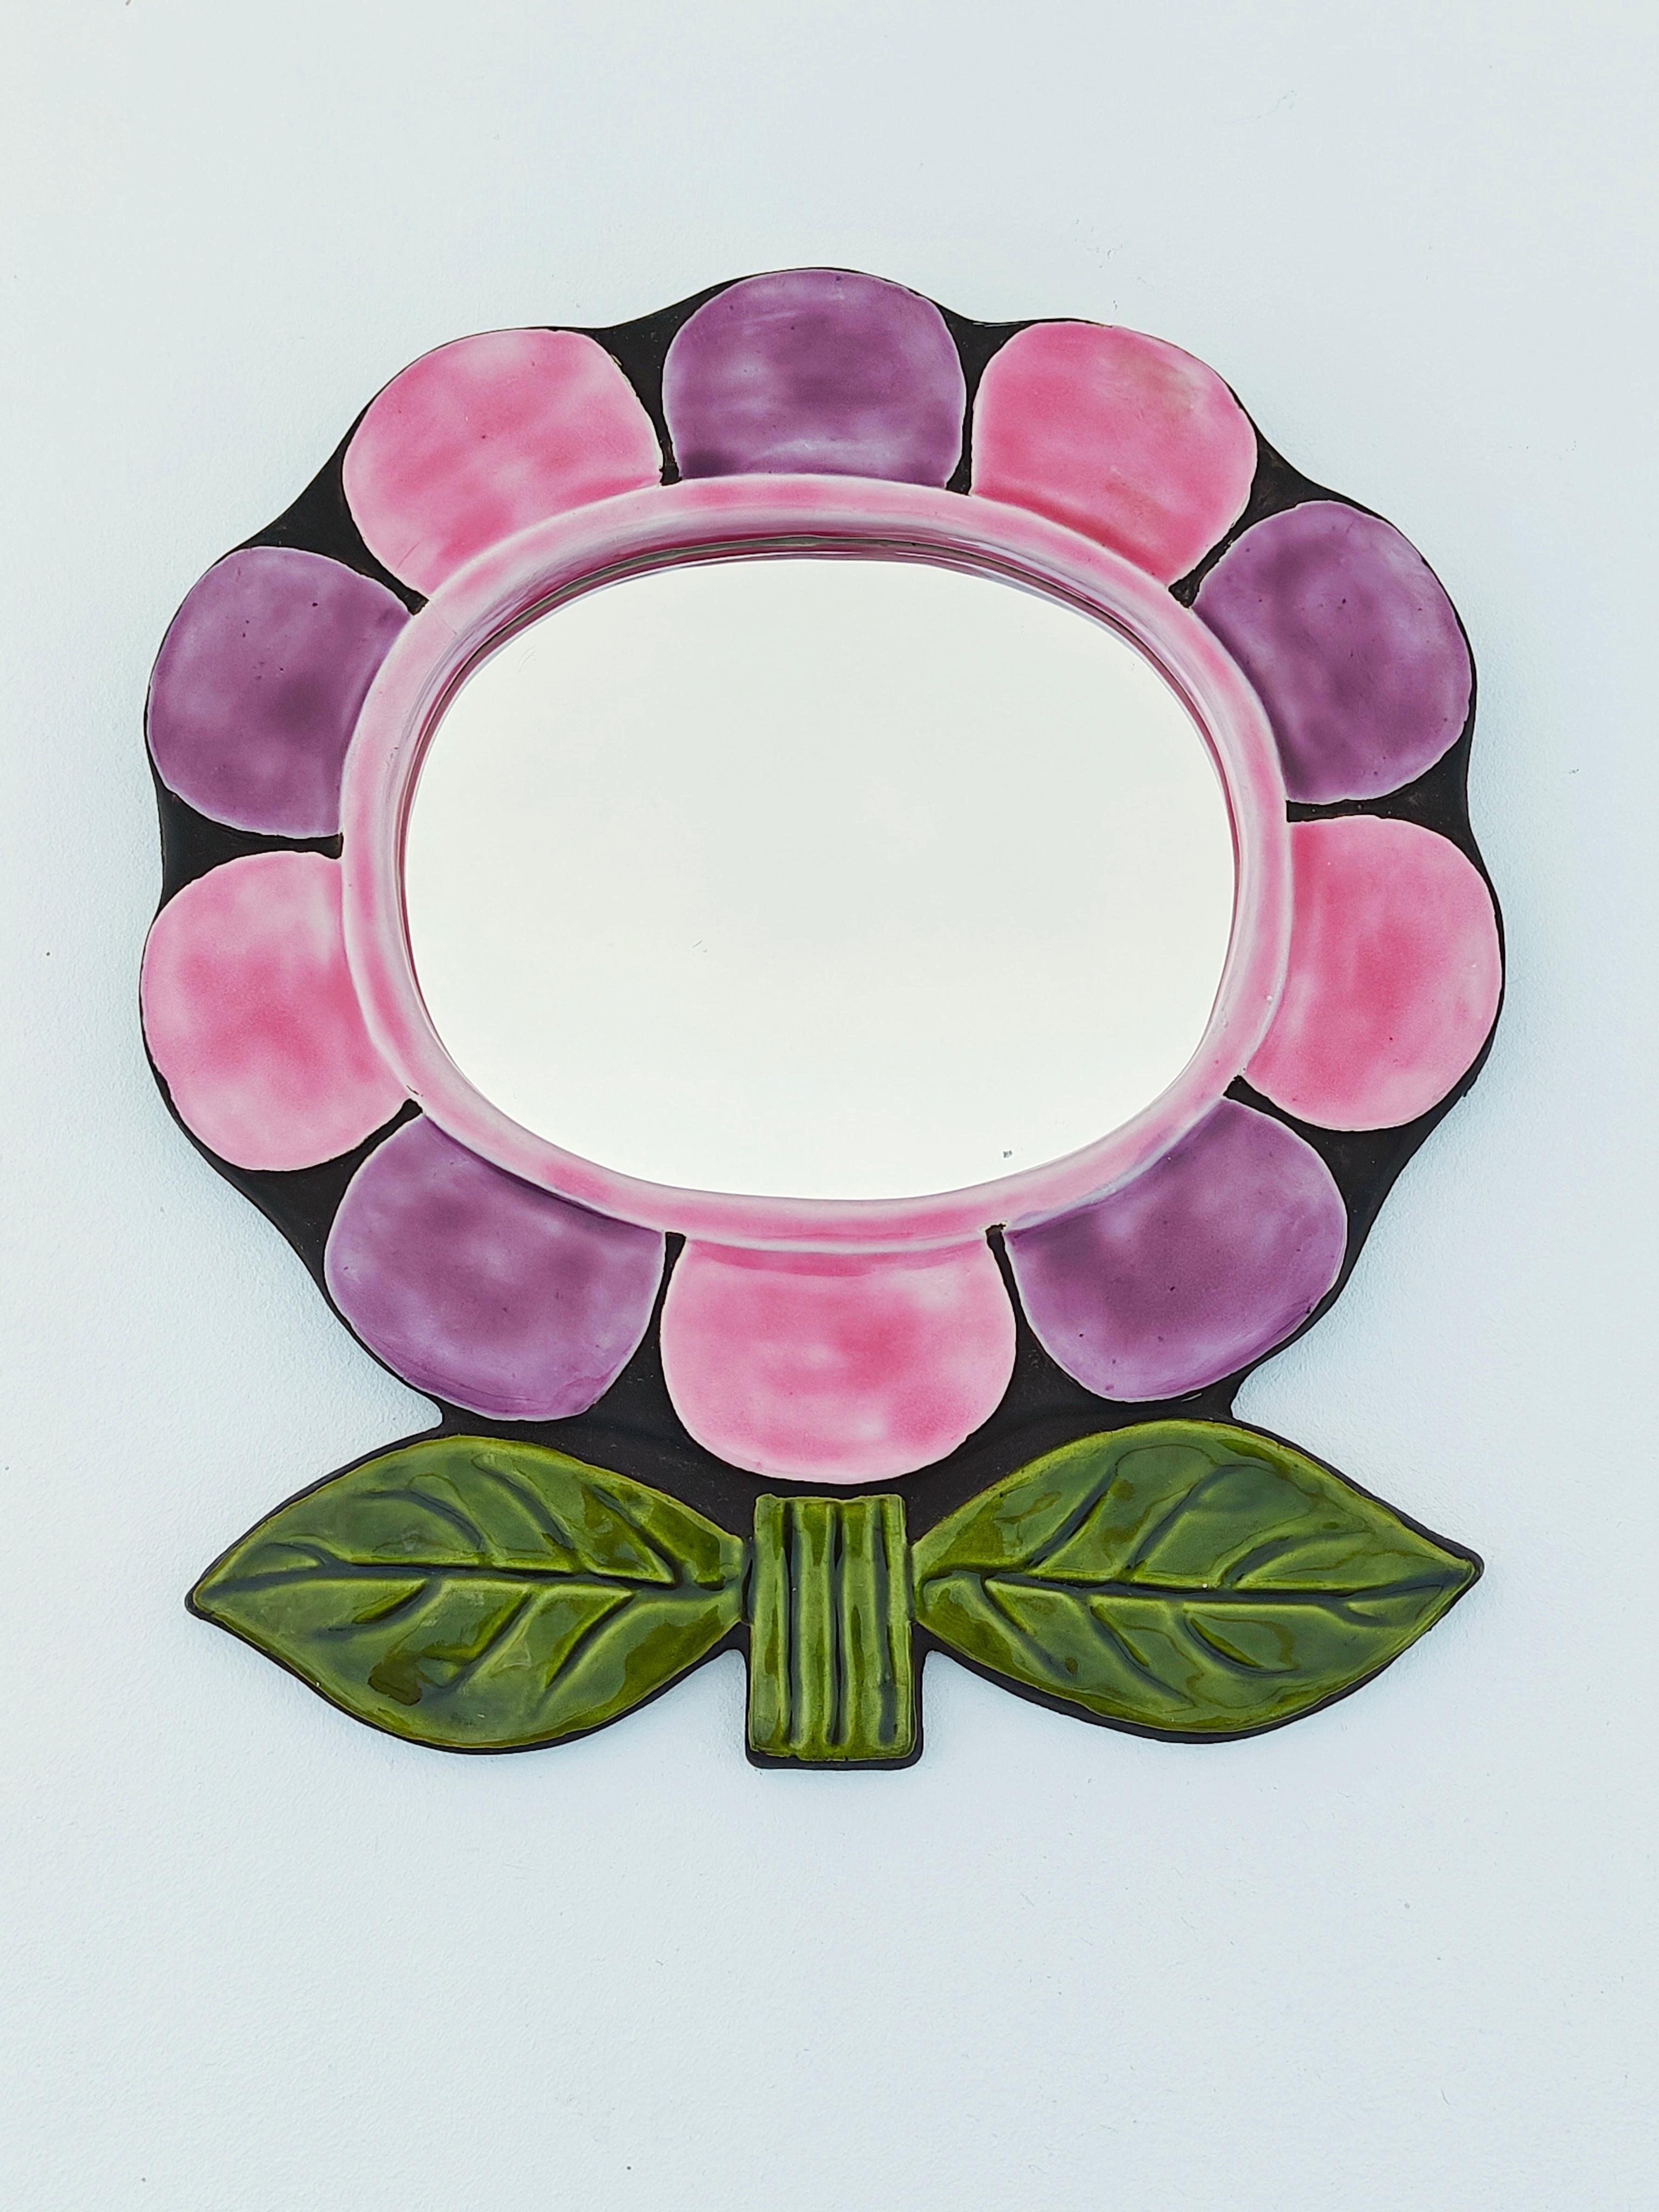 Presenting a truly exquisite piece by Mithé Espelt, this flower-shaped mirror named 